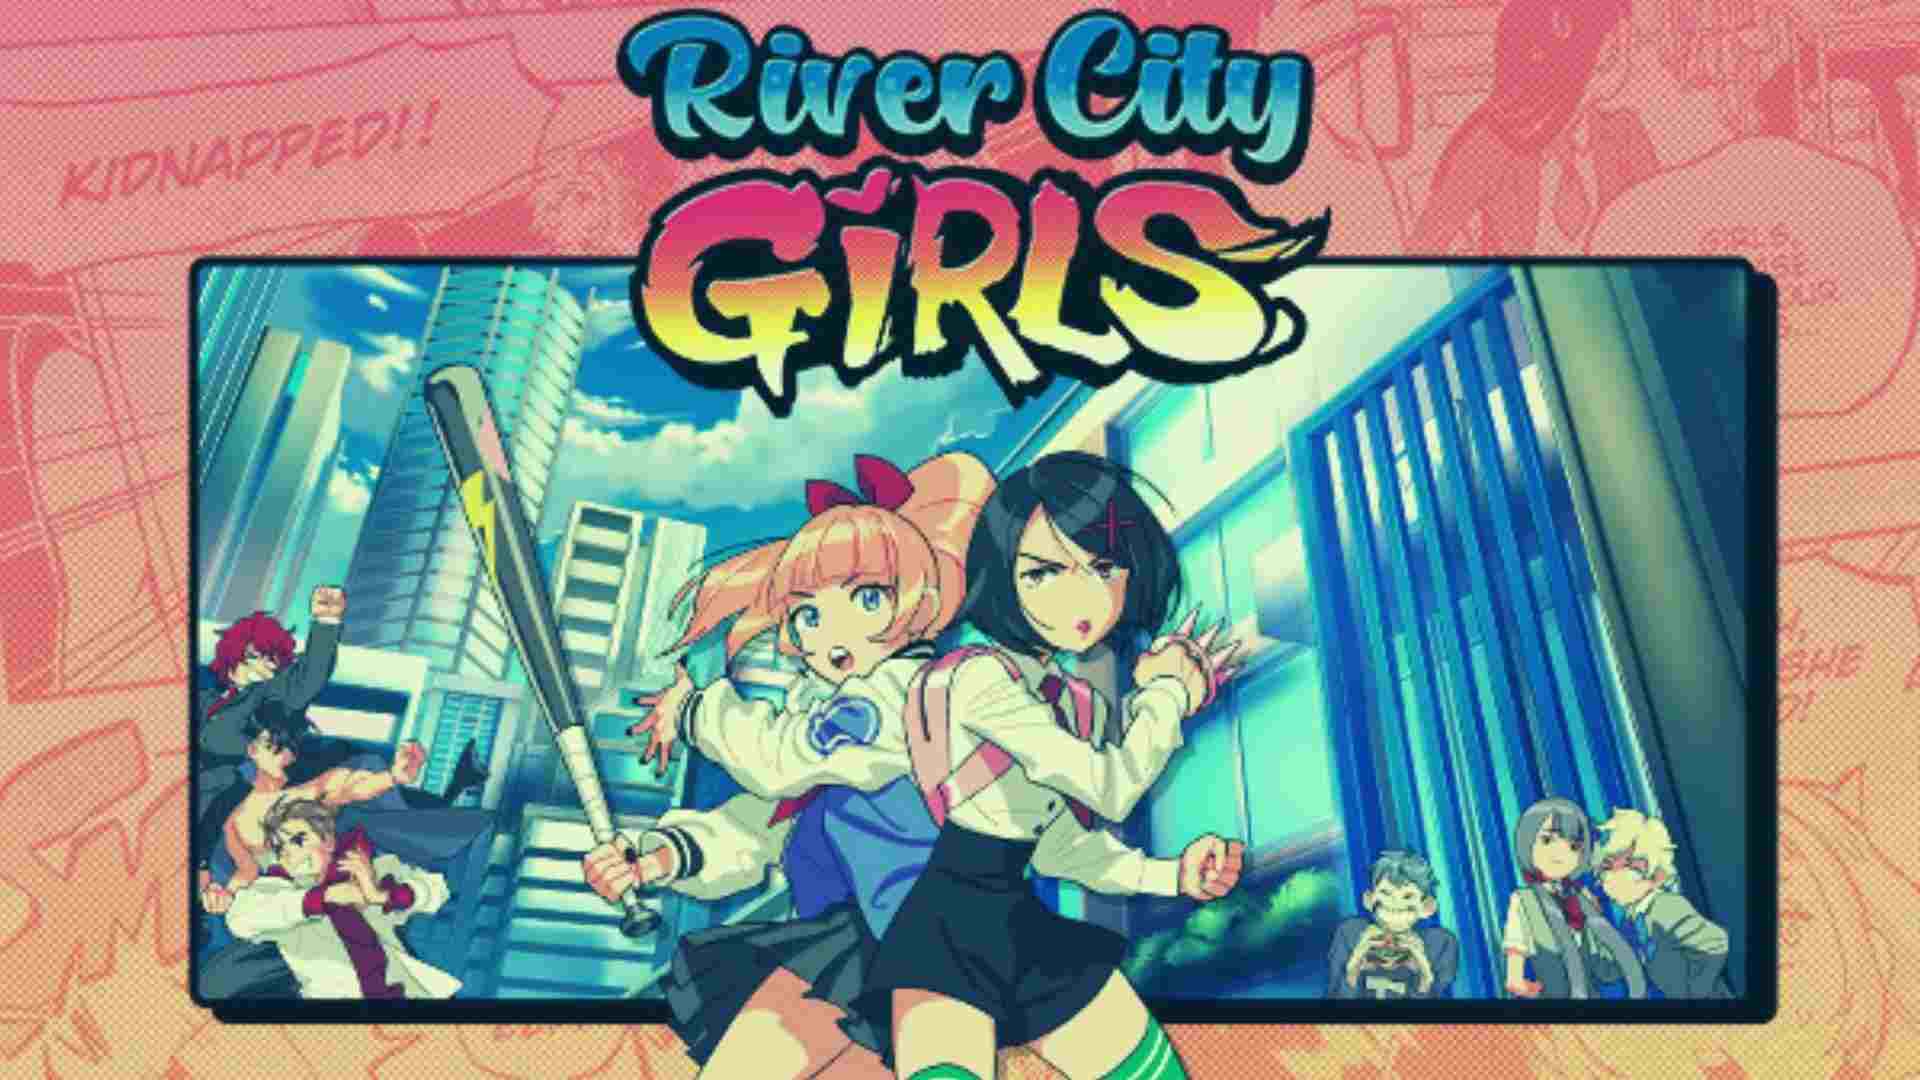 River City Girls Parents Guide and Age Rating